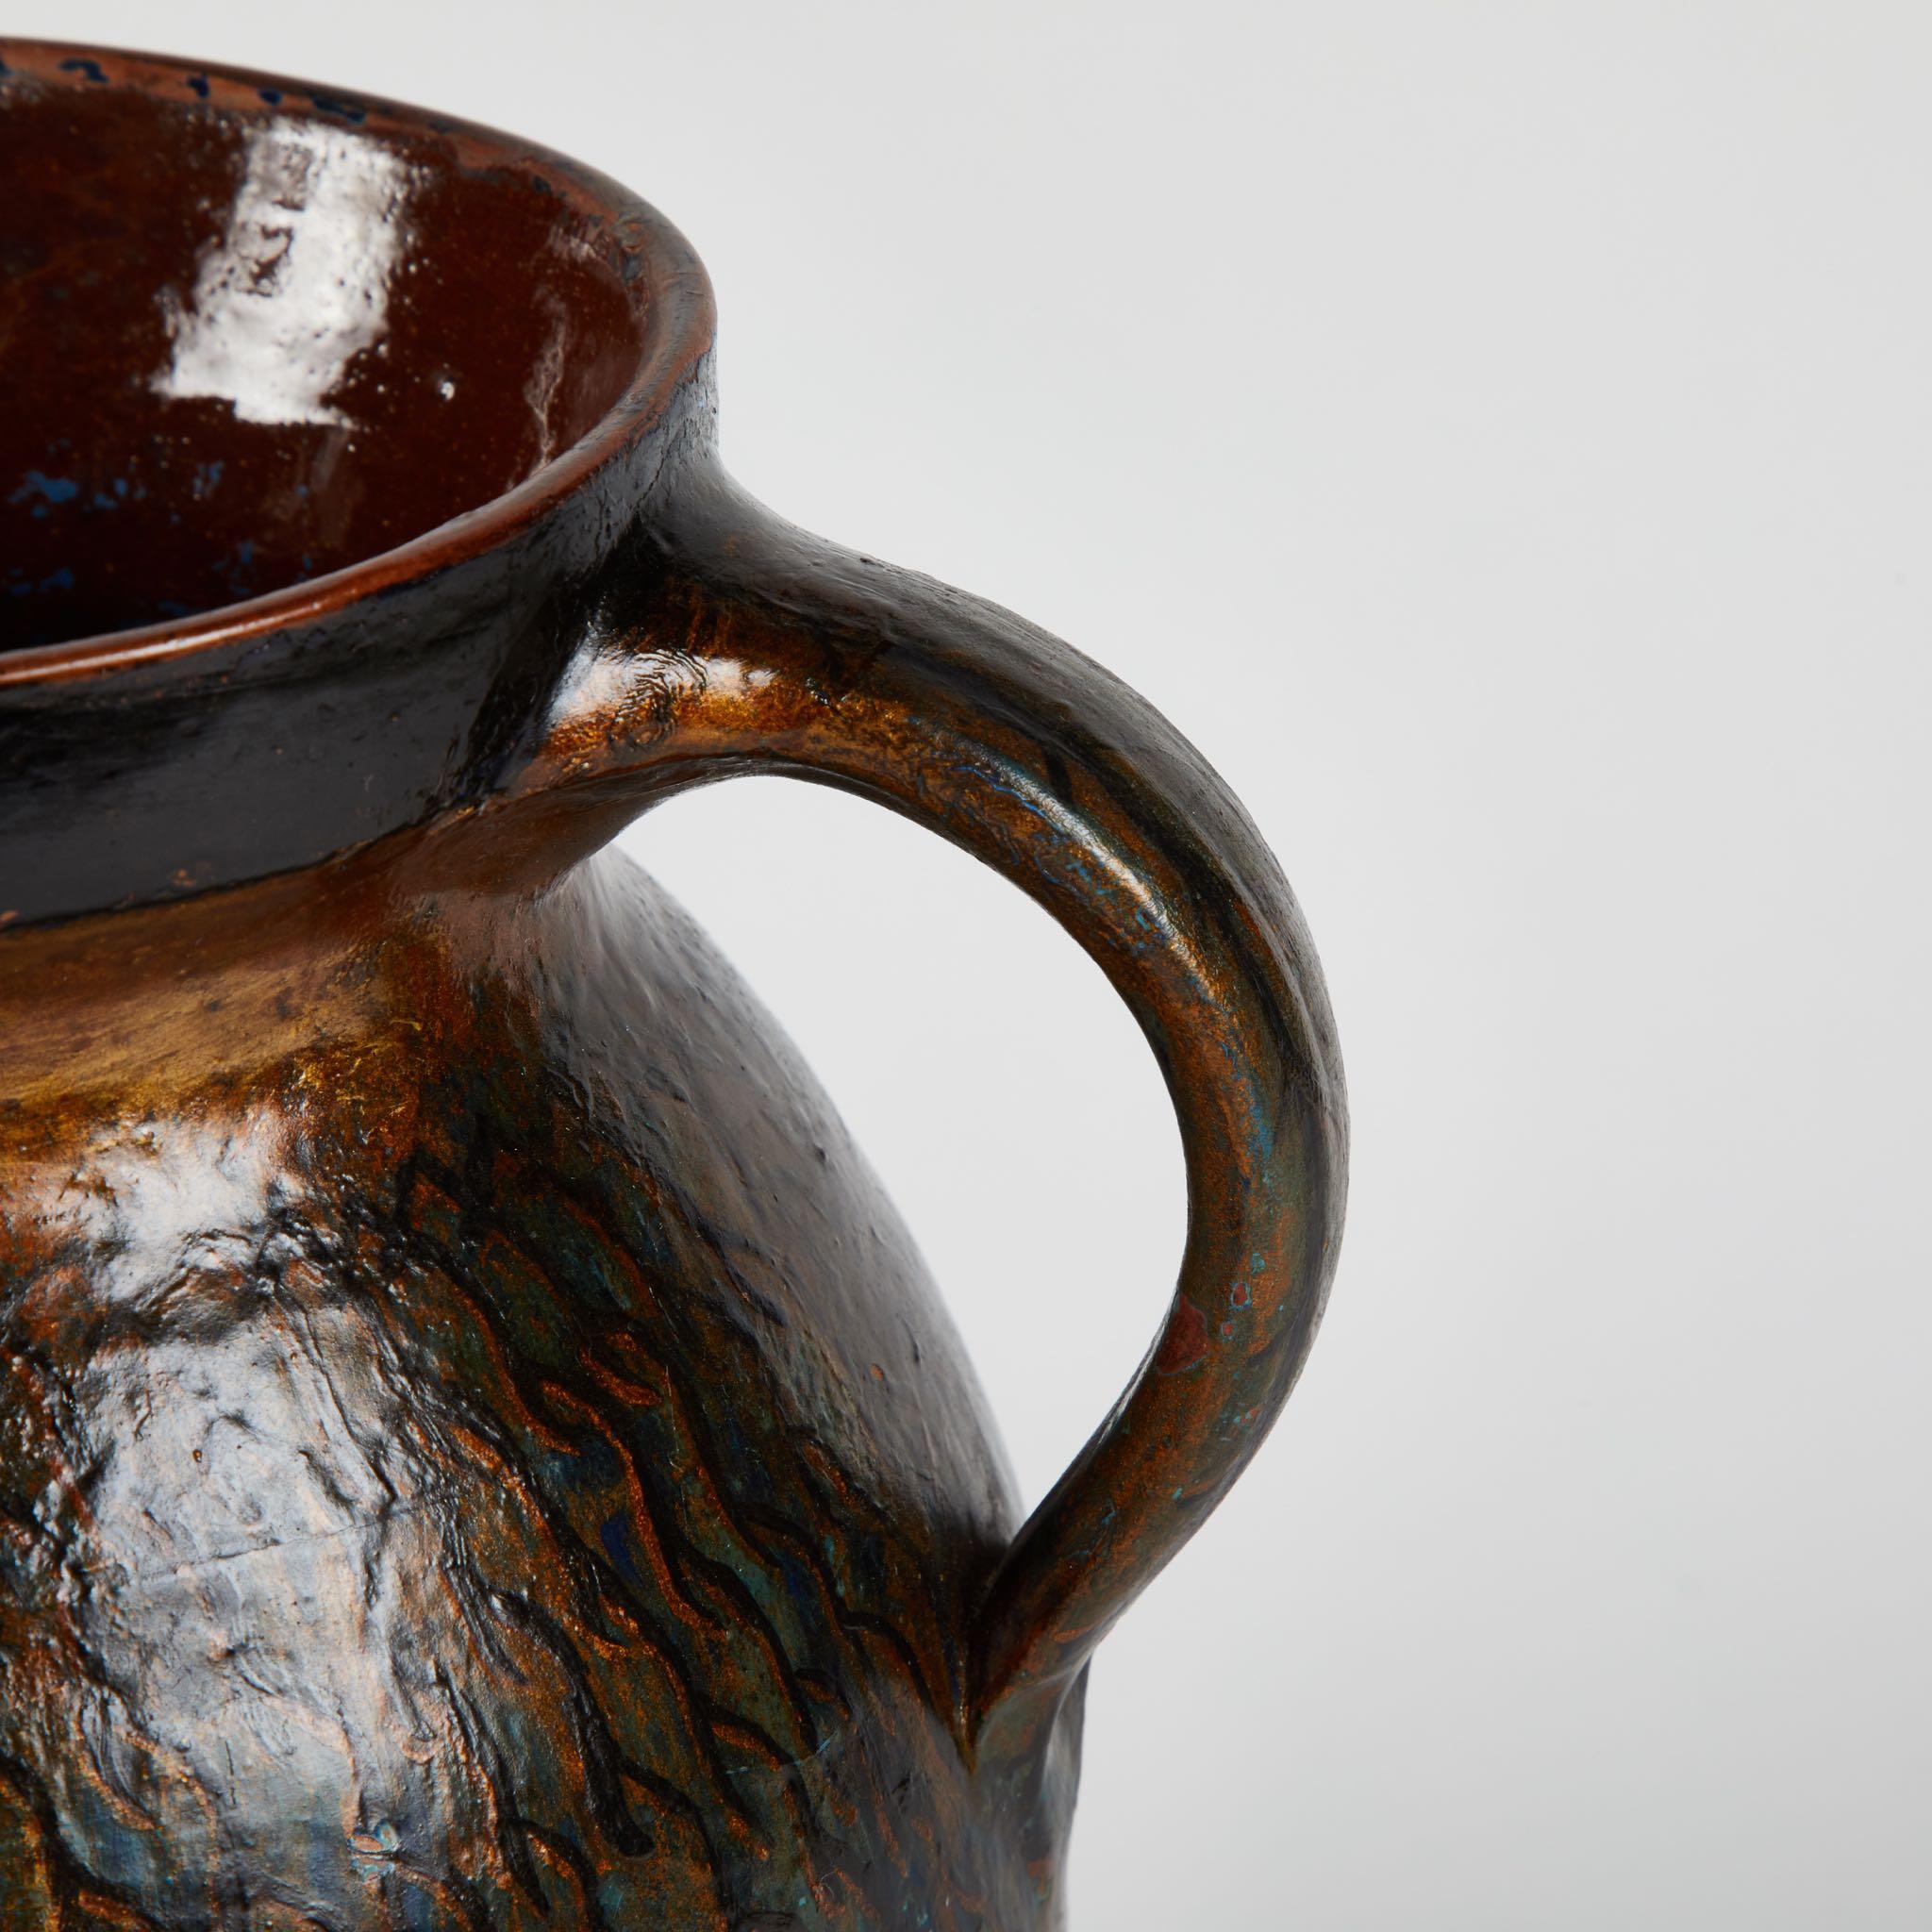 Edwardian Early 20th Century Hurlington Ware Pitcher with Teal and Bronze Painted Detail